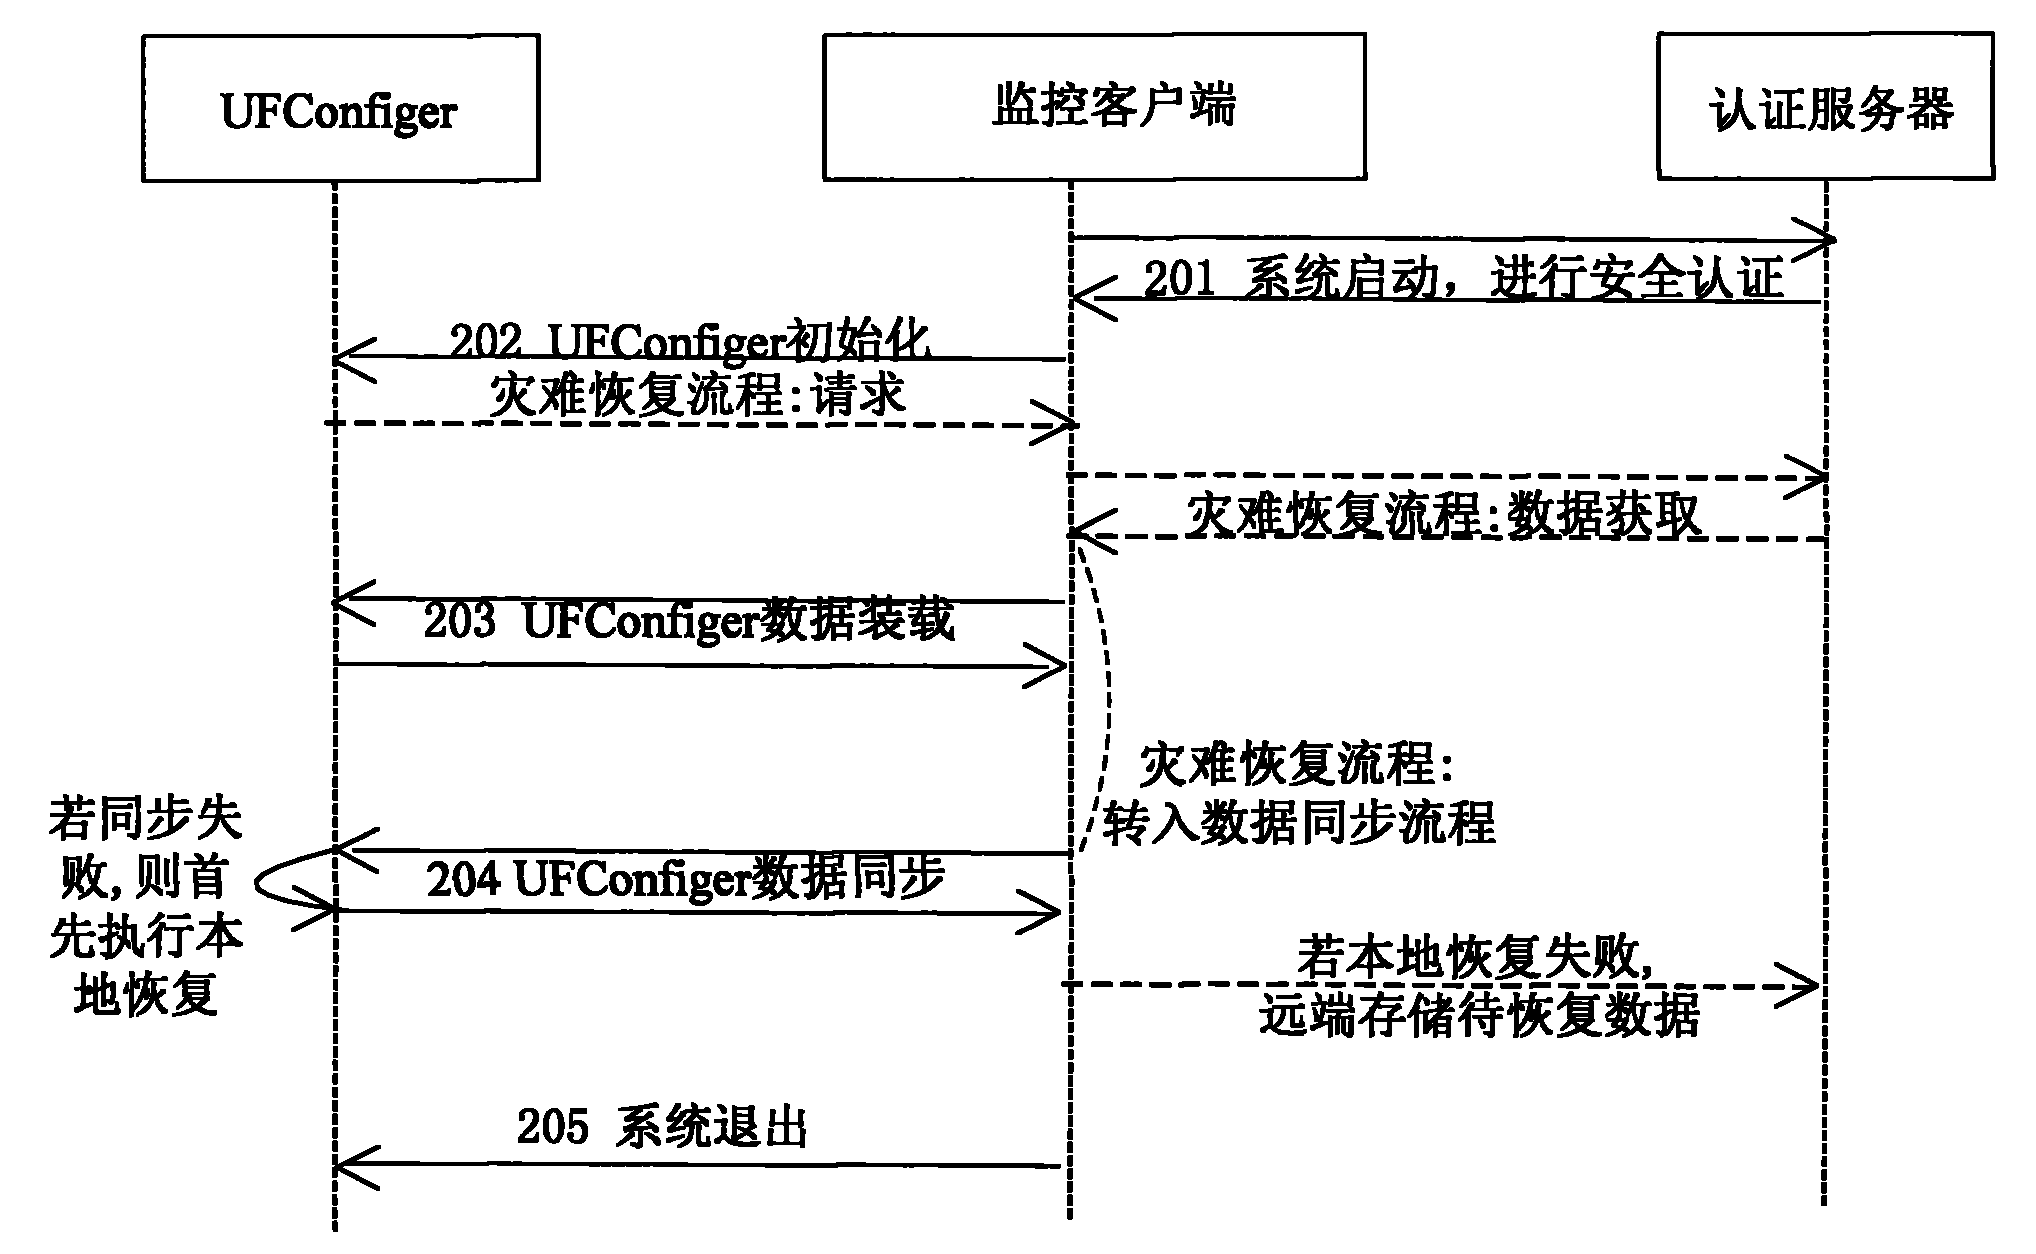 Method and system for storing and managing monitored user configuration information